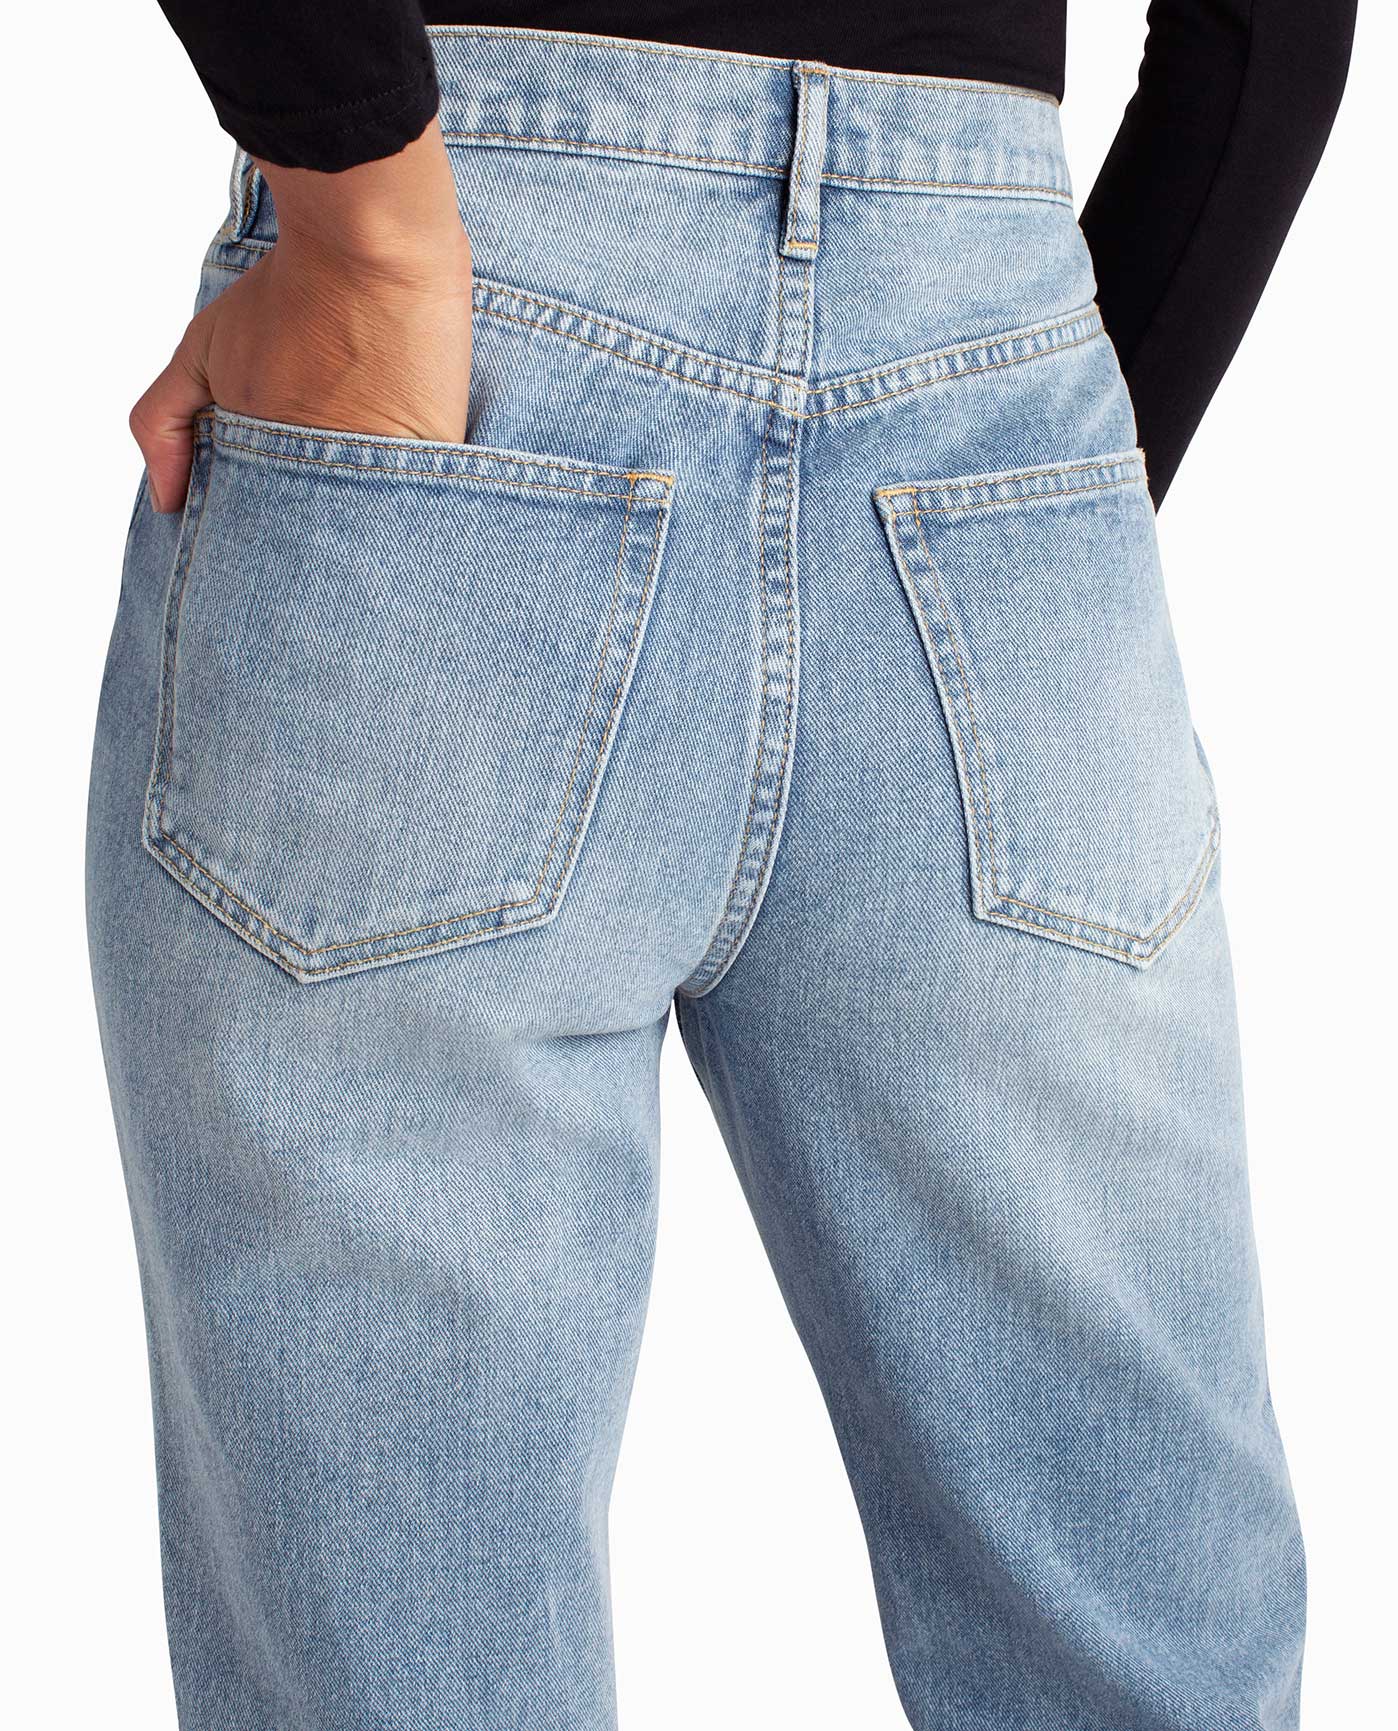 BACK OF CLINTON HILL HIGH RISE 90'S LOOSE FIT JEAN WITH HAND IN POCKET | Medium Blue